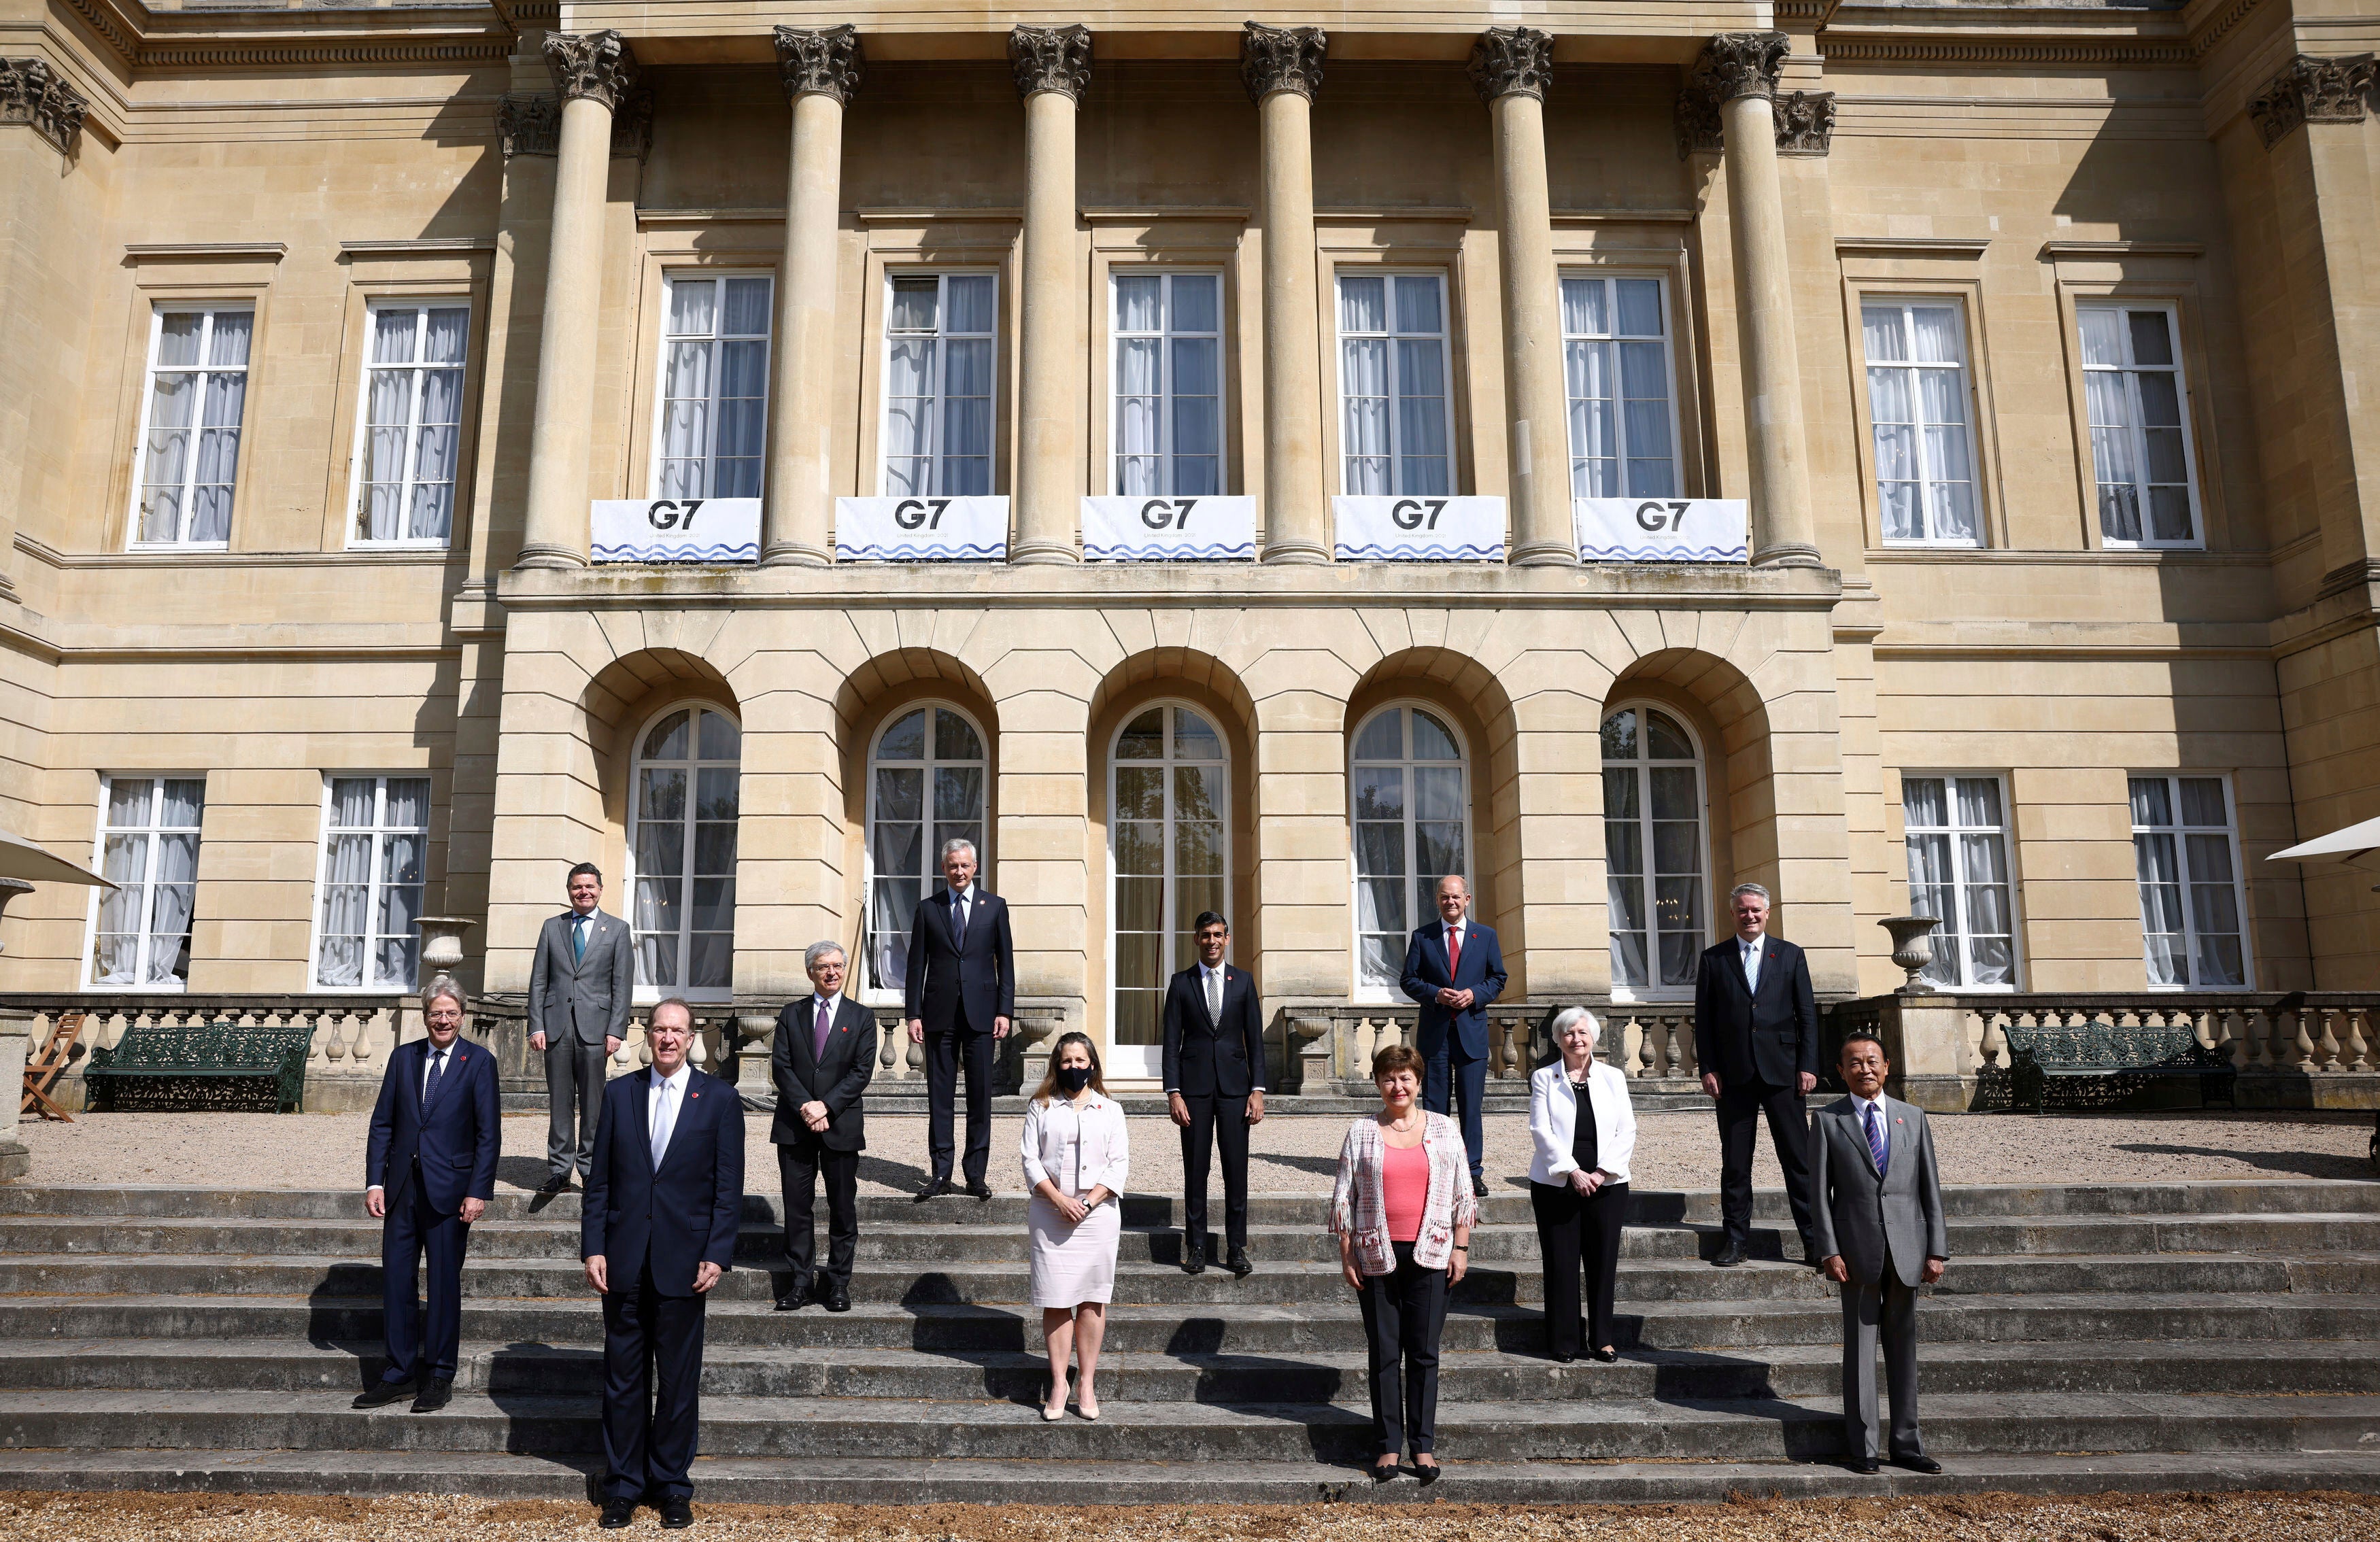 Finance ministers from the G7 nations meeting last weekend at Lancaster House in London, ahead of the G7 leaders’ summit